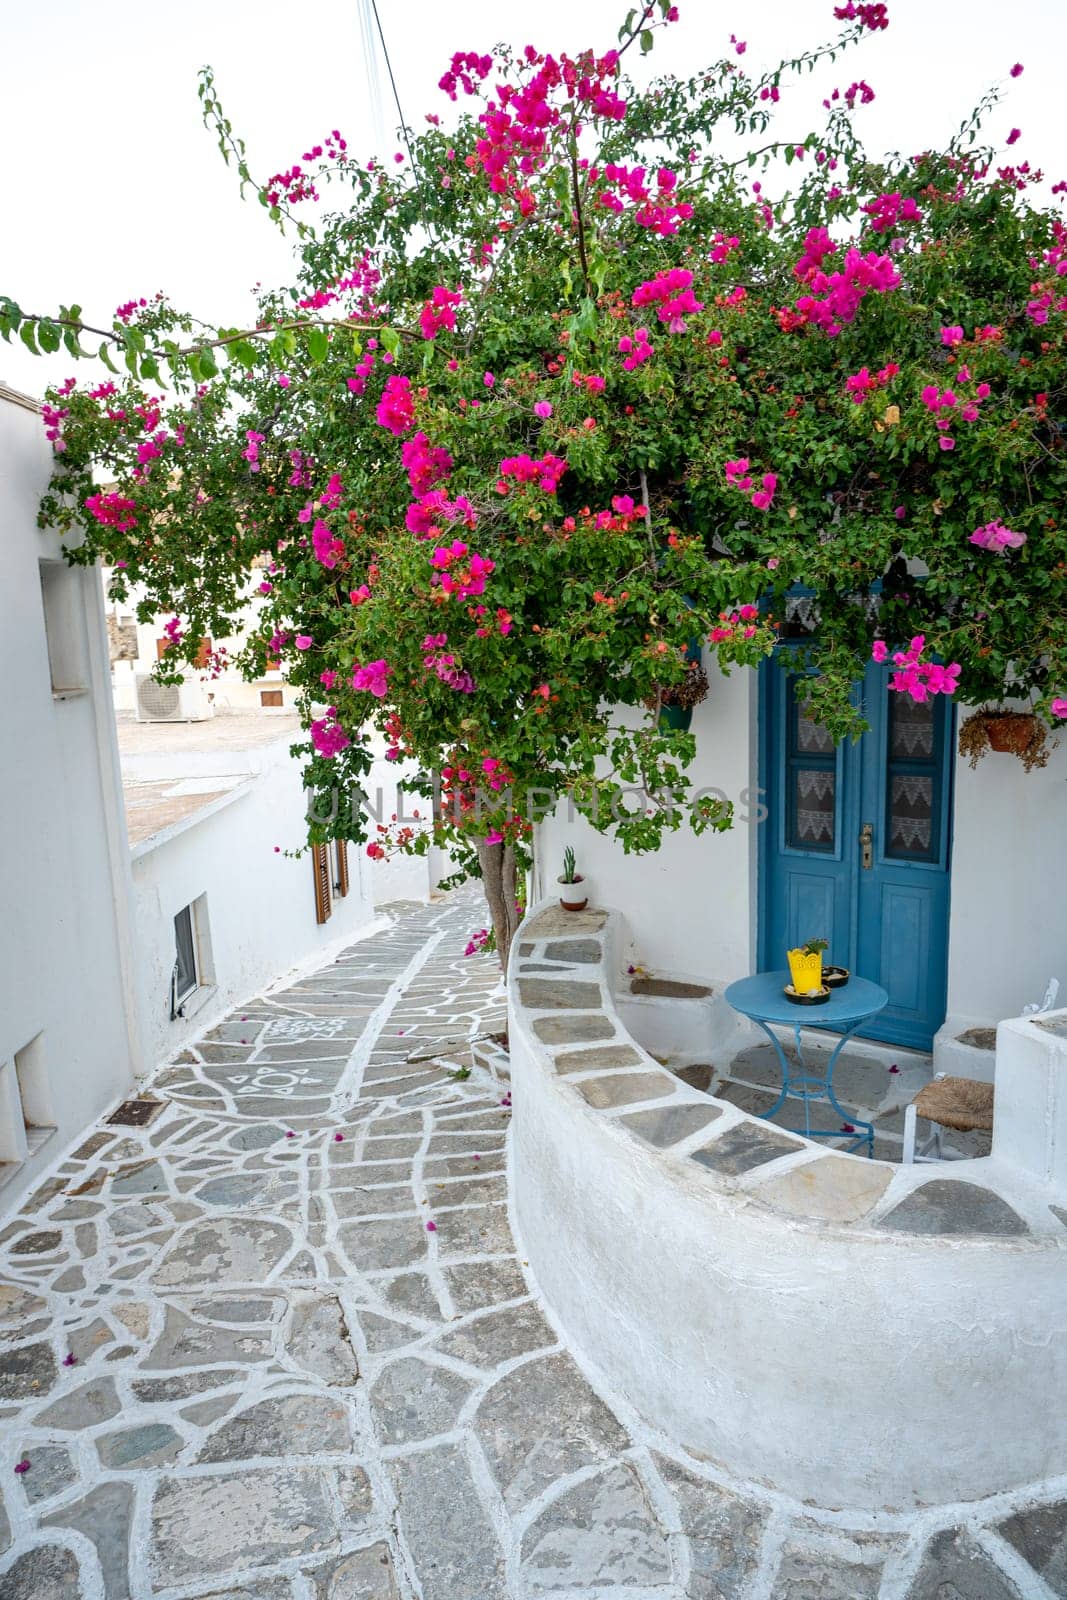 Bougainvillea in the streets of Lefkes, Paros